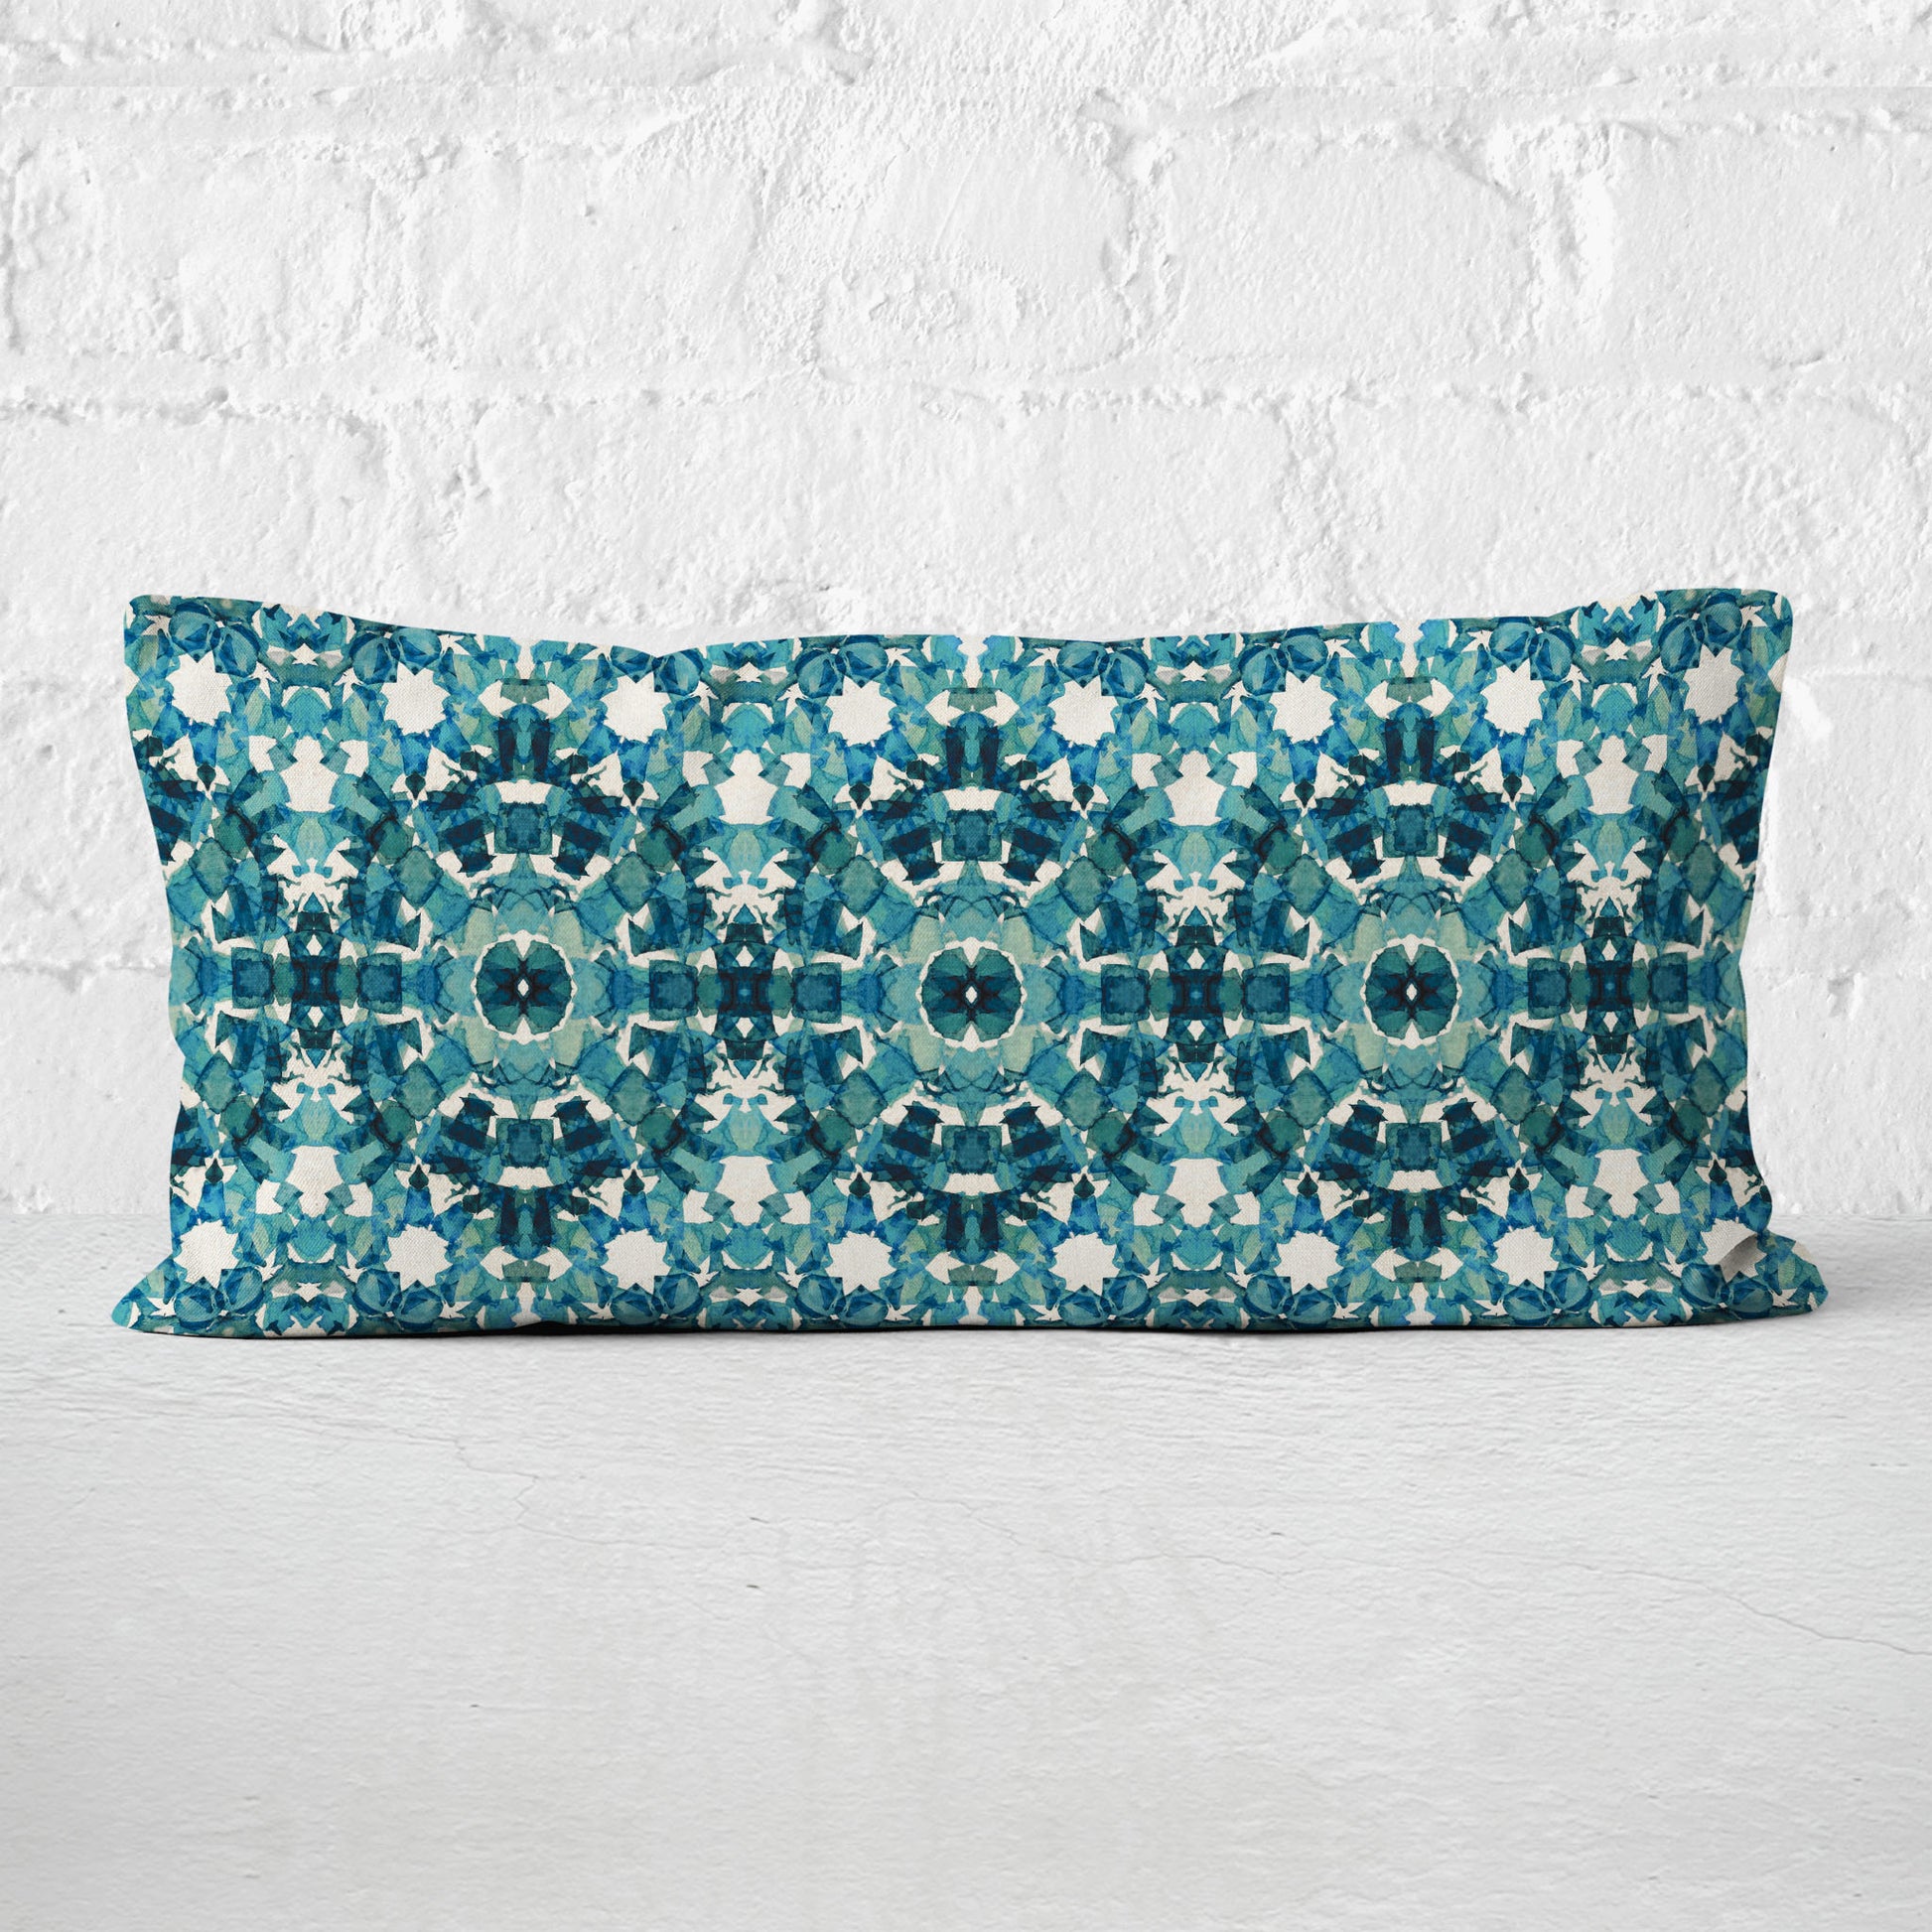 Rectangular lumbar pillow featuring handprinted pattern in teal leaning against a white brick wall.